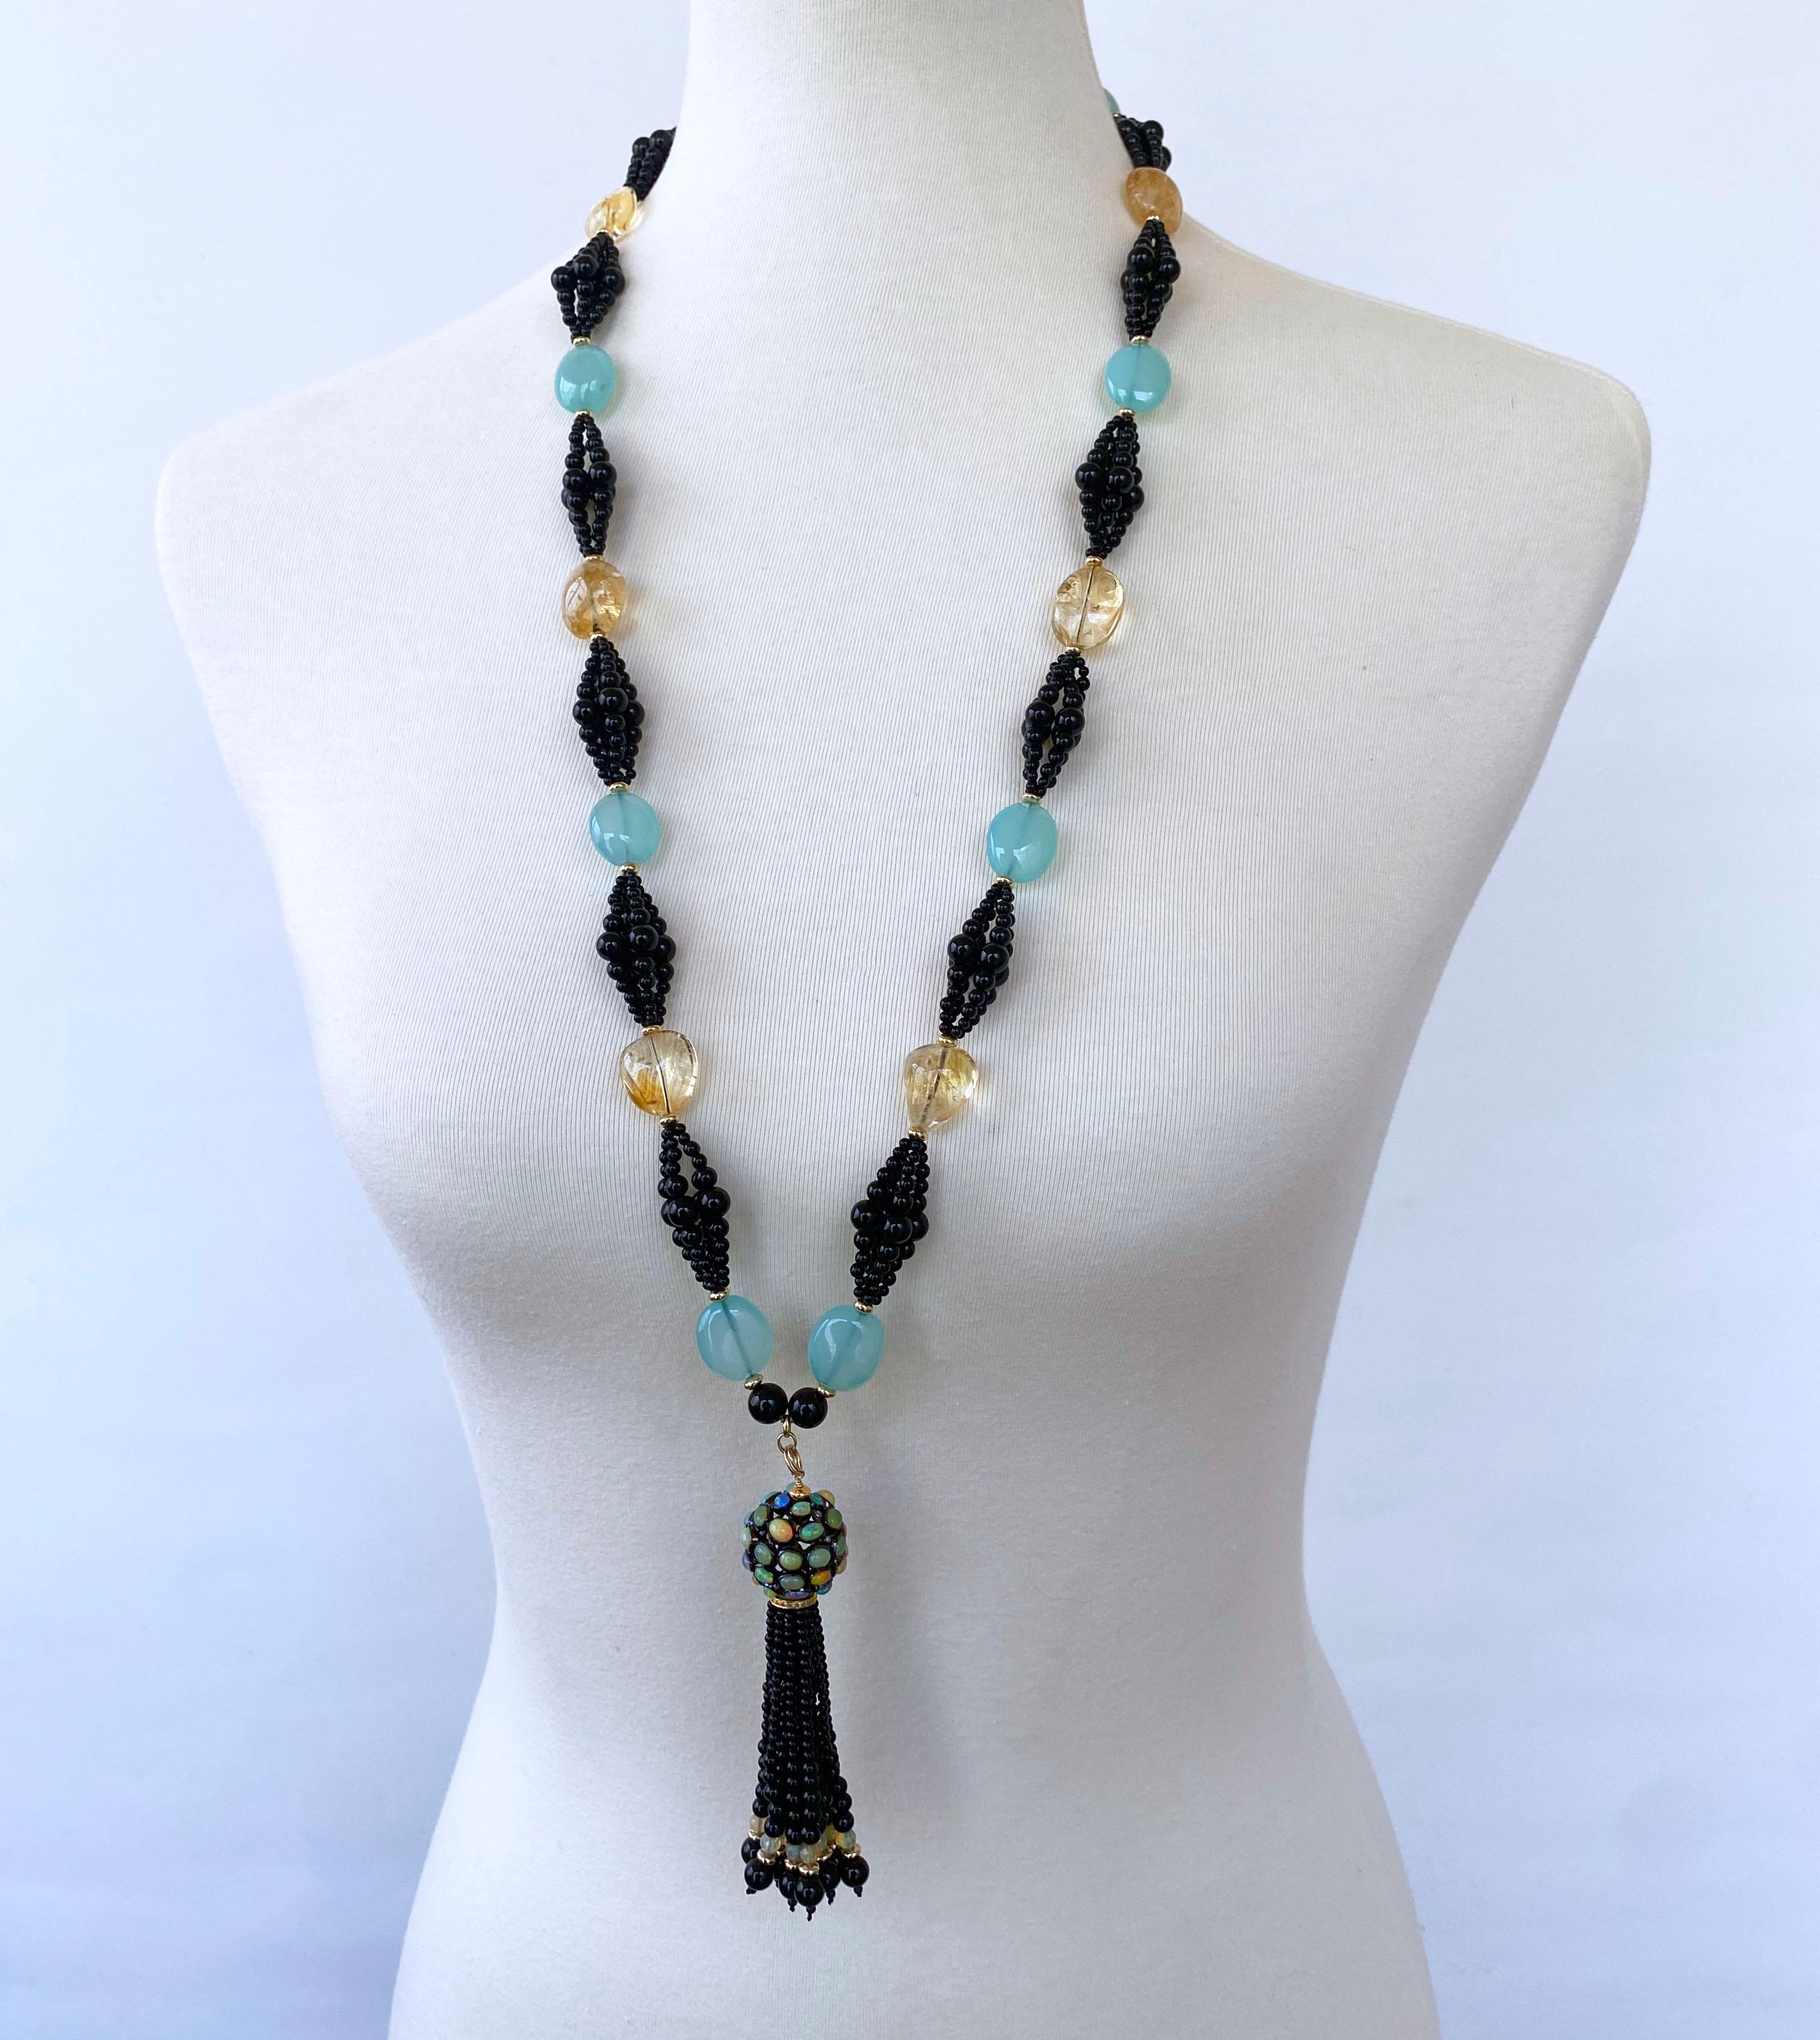 Gorgeous One of A kind Infinity Necklace by Marina J. 

Measuring 35 inches long sans Tassel, this necklace is made with all Black Onyx, Citrine & Chalcedony which are adorned by 18k Yellow Gold Plated - Silver beads and solid 14k Yellow Gold